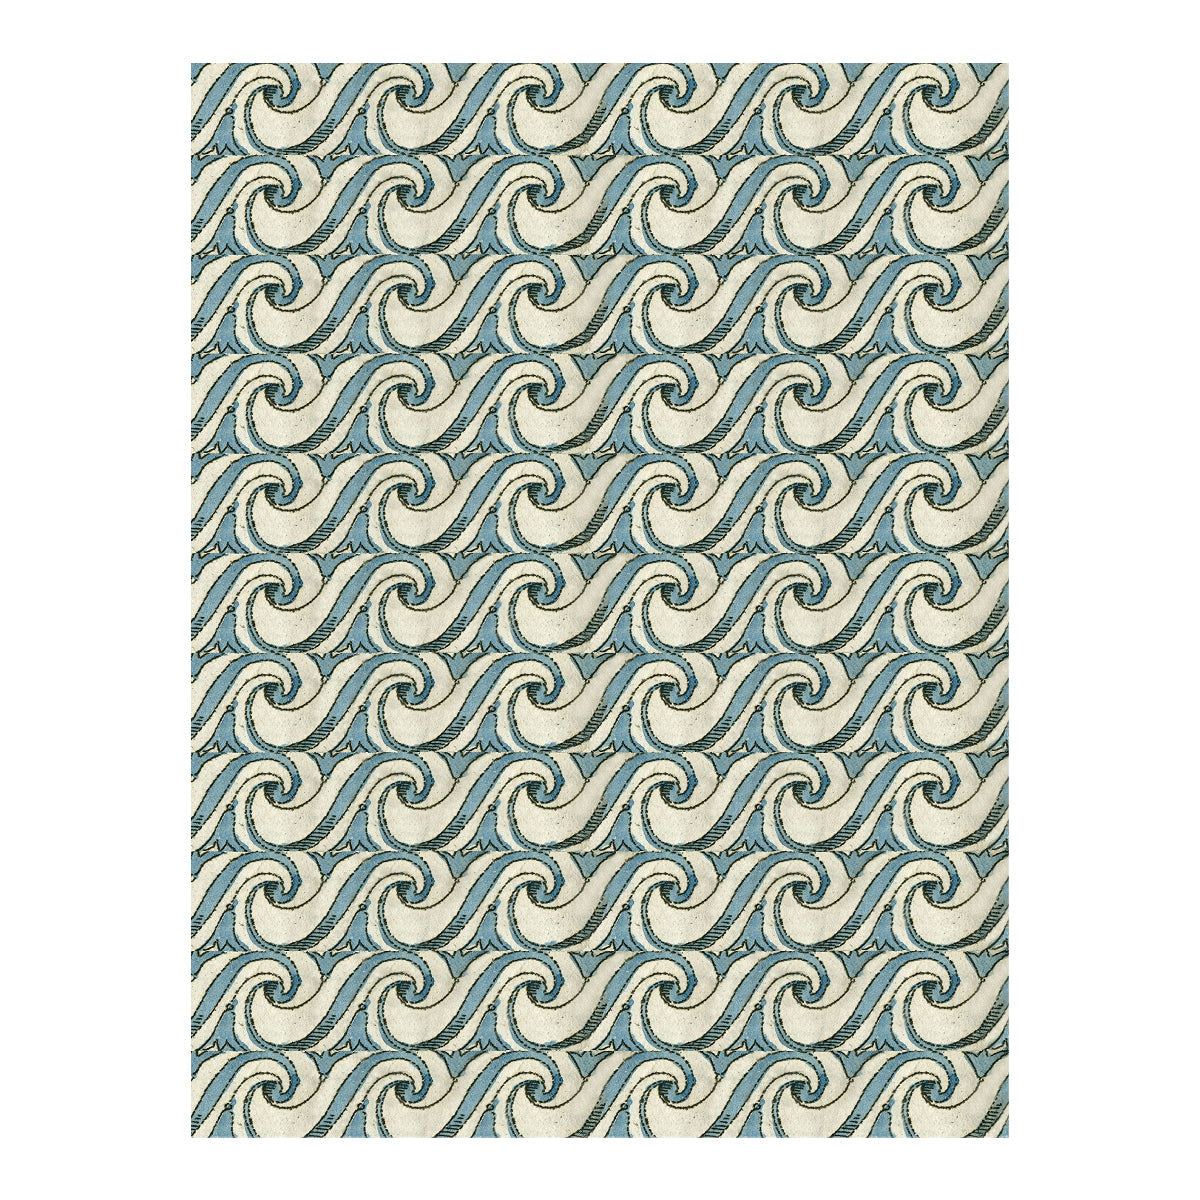 John Derian Wrapping Paper Waves